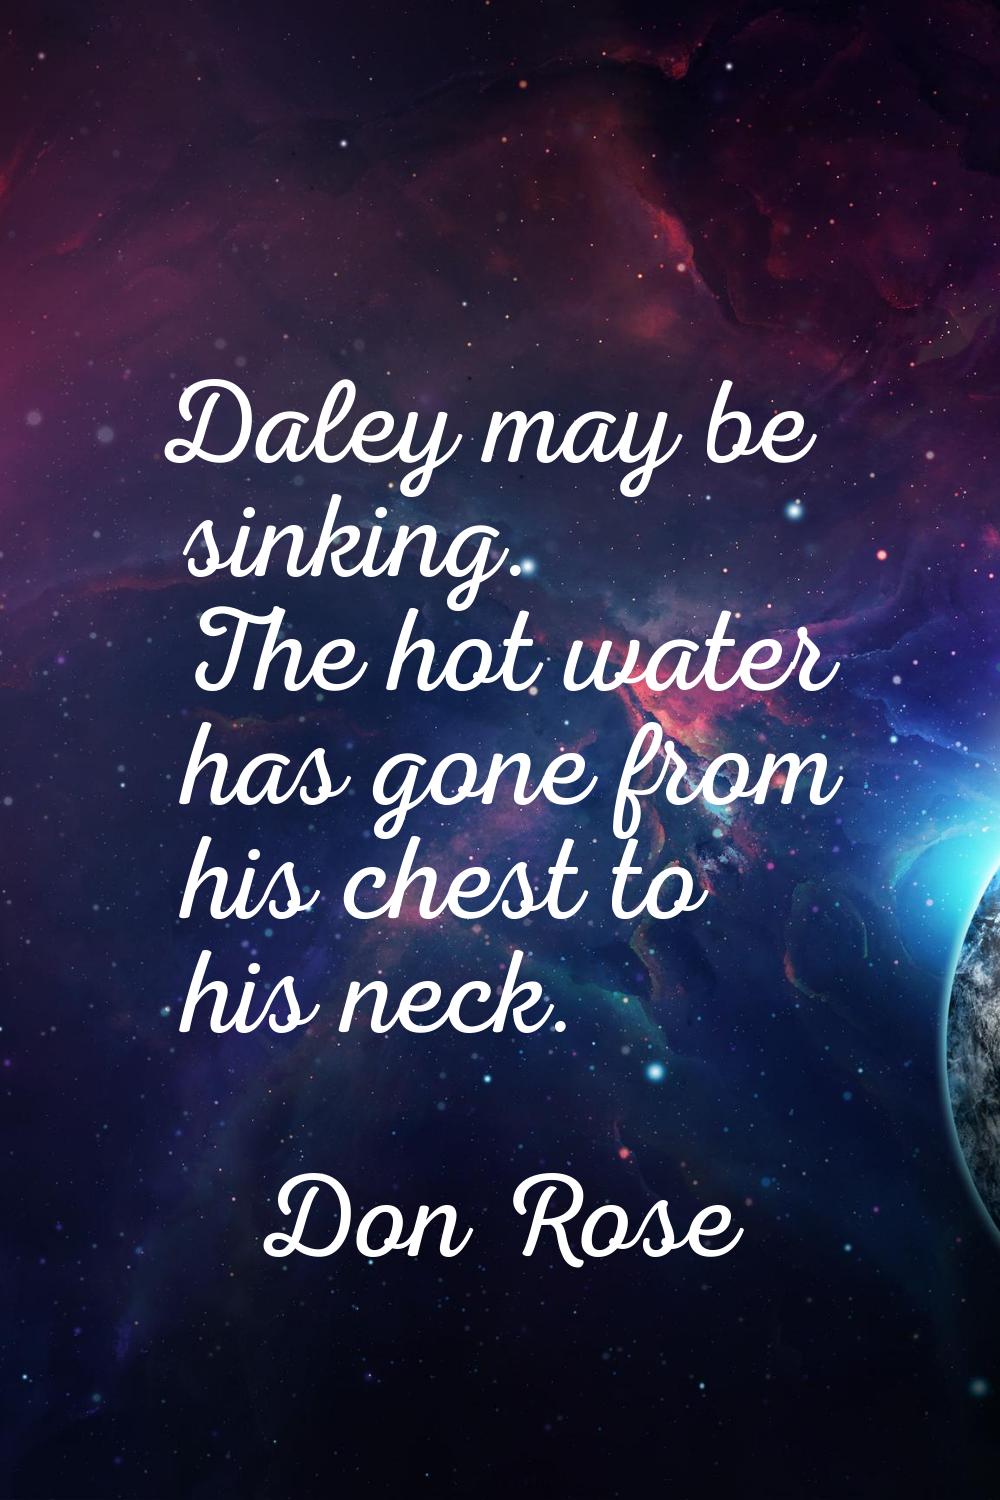 Daley may be sinking. The hot water has gone from his chest to his neck.